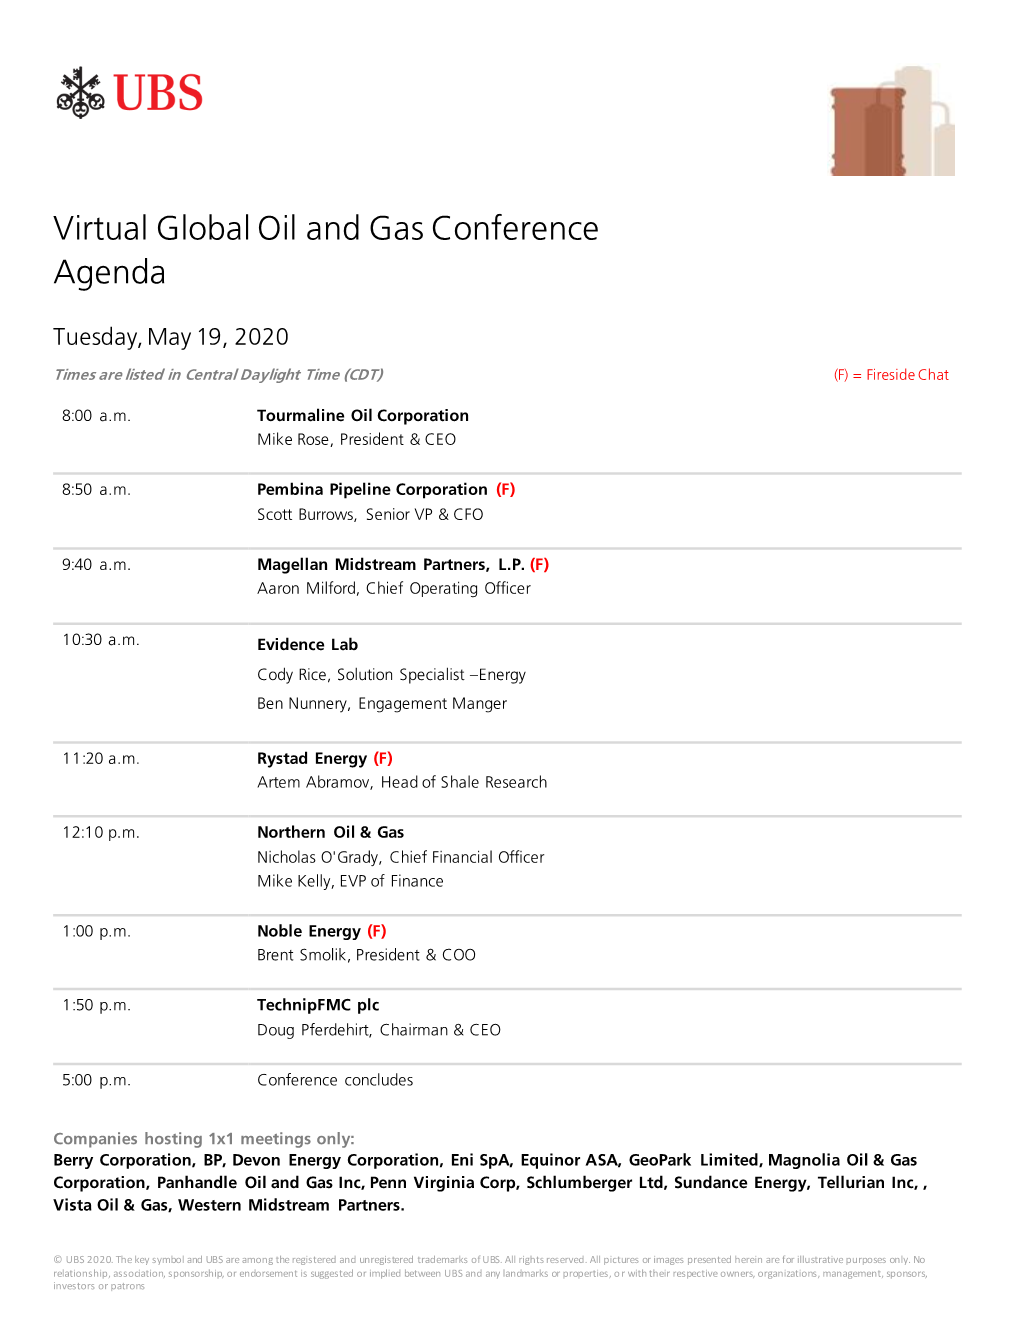 Virtual Global Oil and Gas Conference Agenda